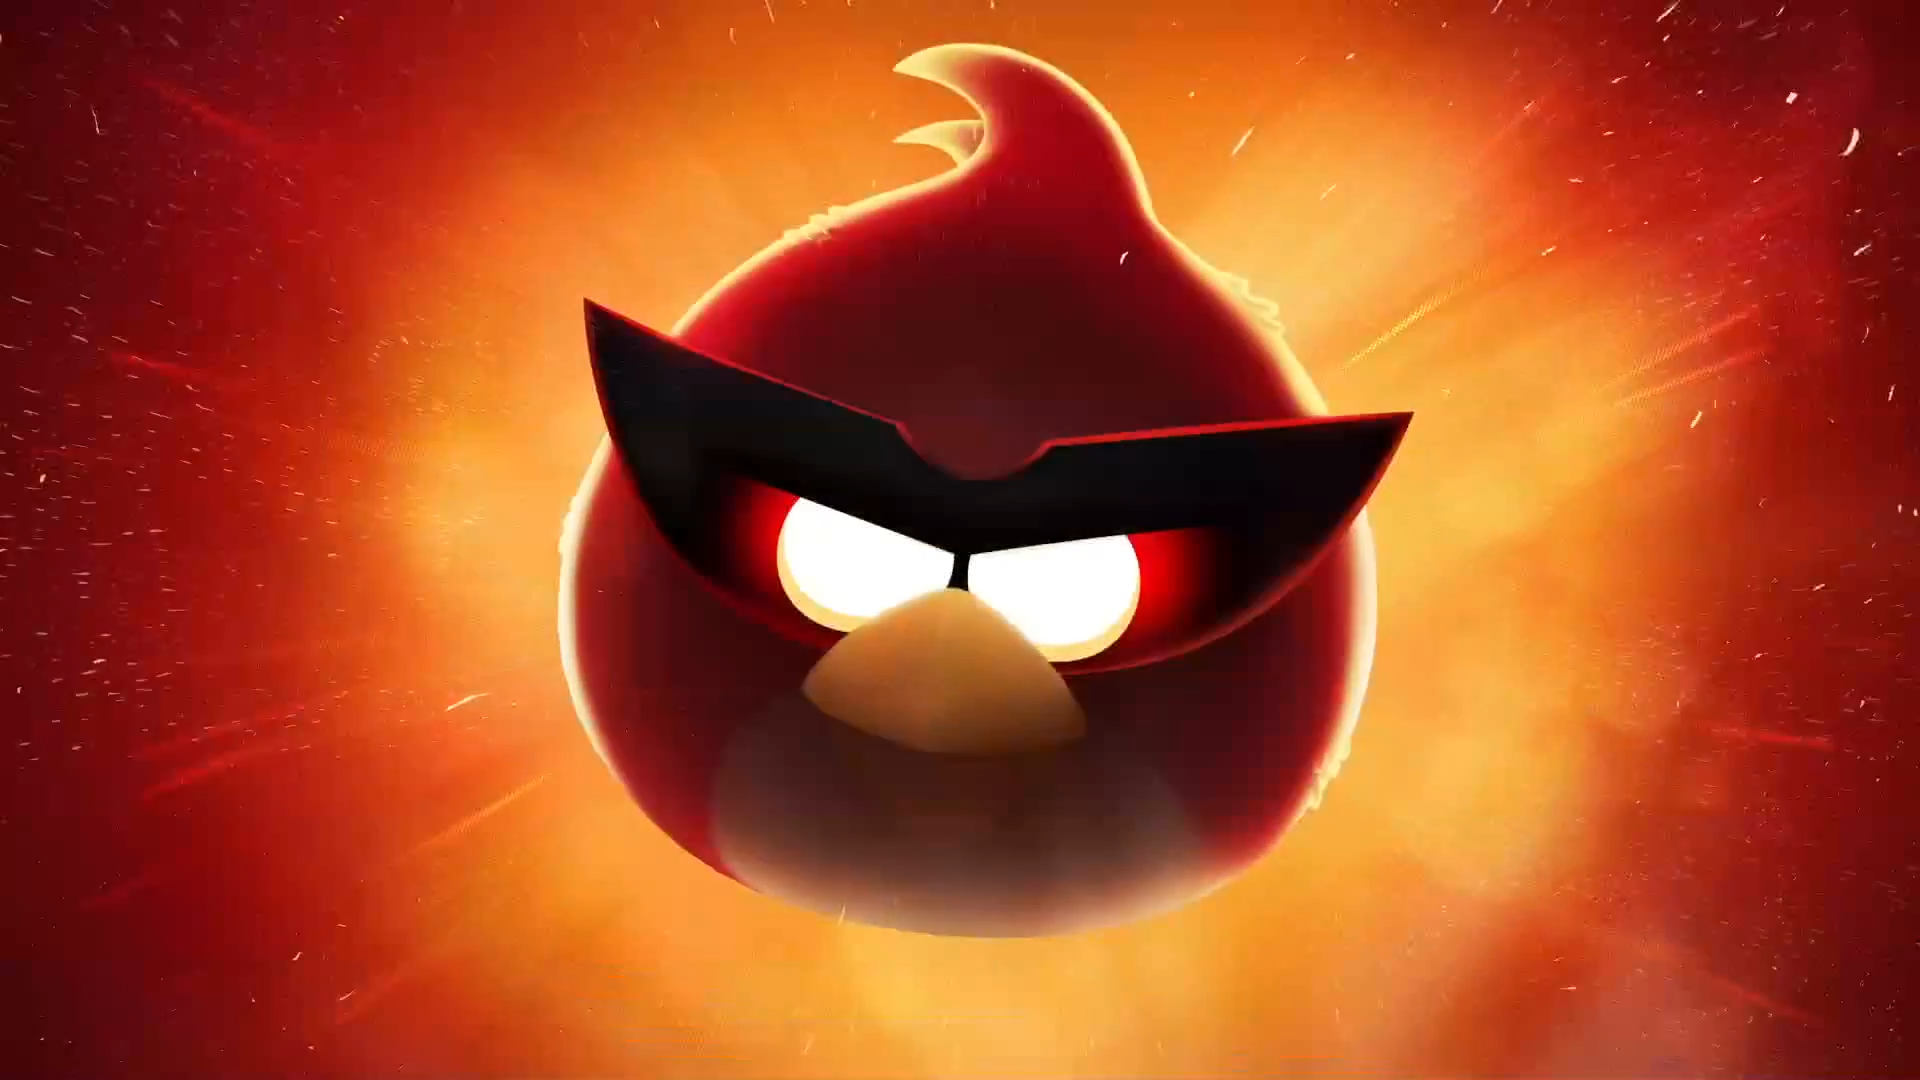 Angry Birds Desktop Wallpapers | Angry Birds New Images | Cool ...